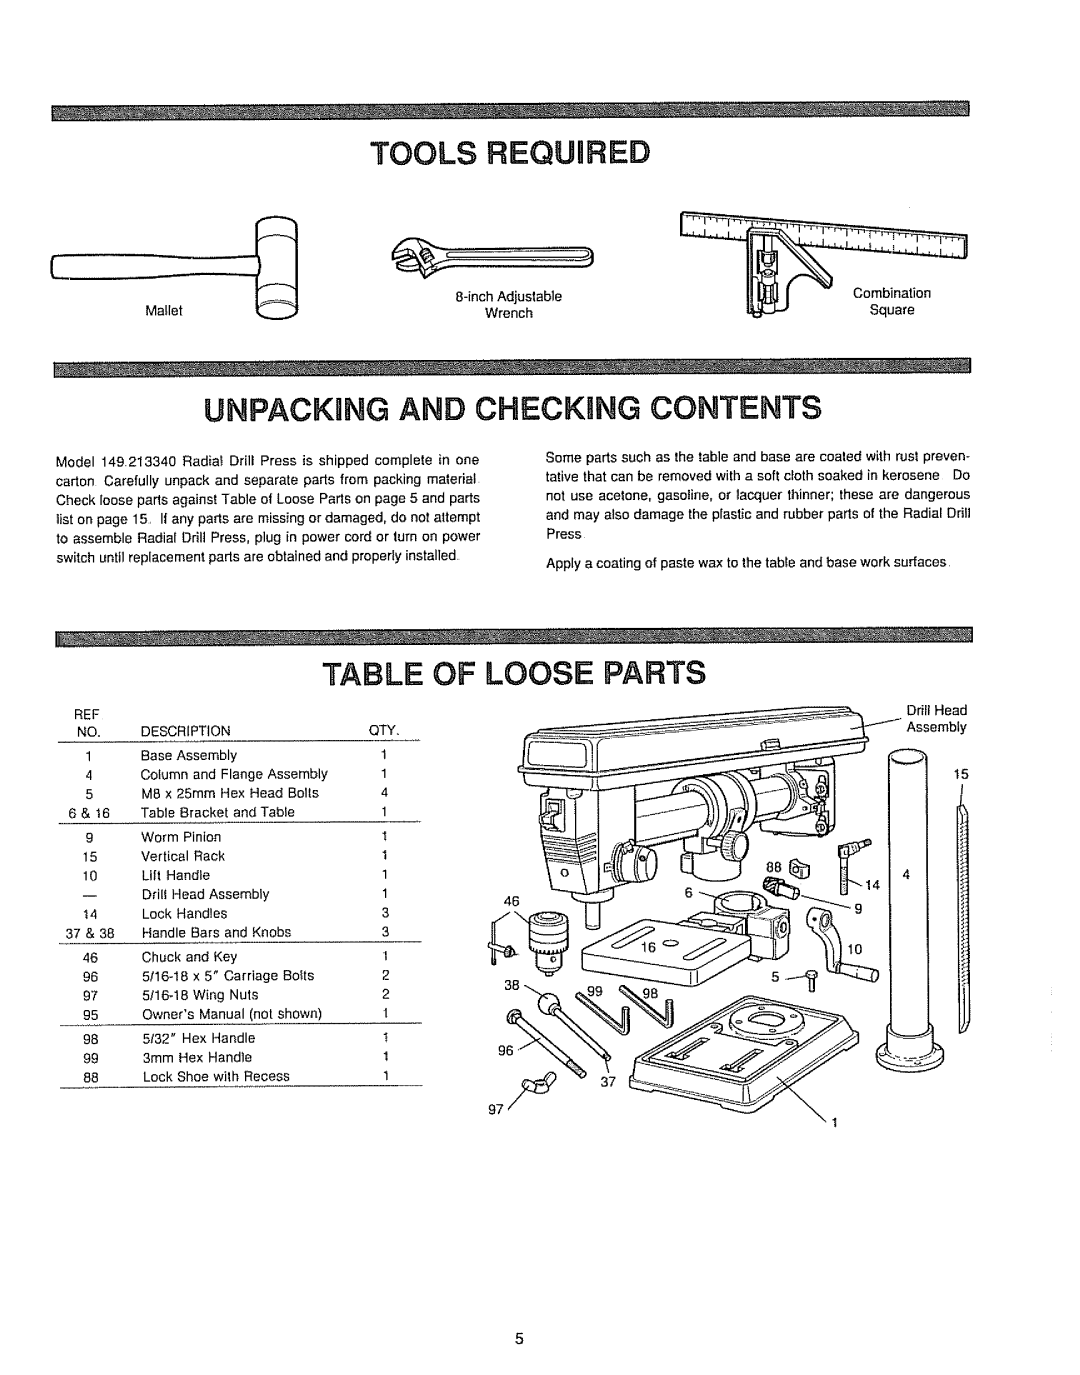 Sears 149.213340 warranty TOOLS REQUmRED, Unpackrng And Checkung Contents, Table Of Loose Parts 